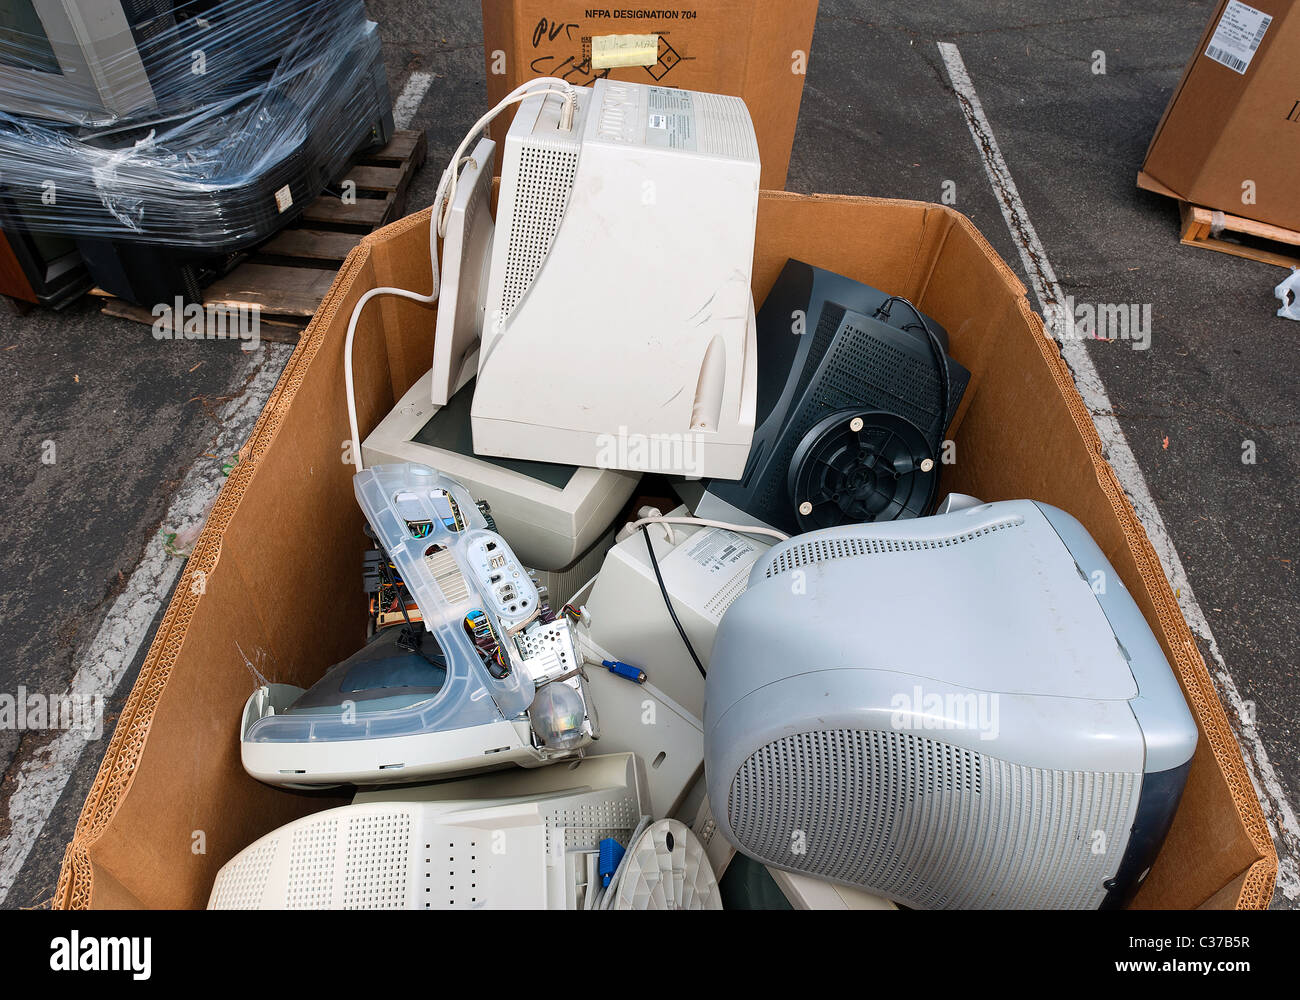 Electronic goods collected for recycling in Santa Barbara at earth day. Stock Photo